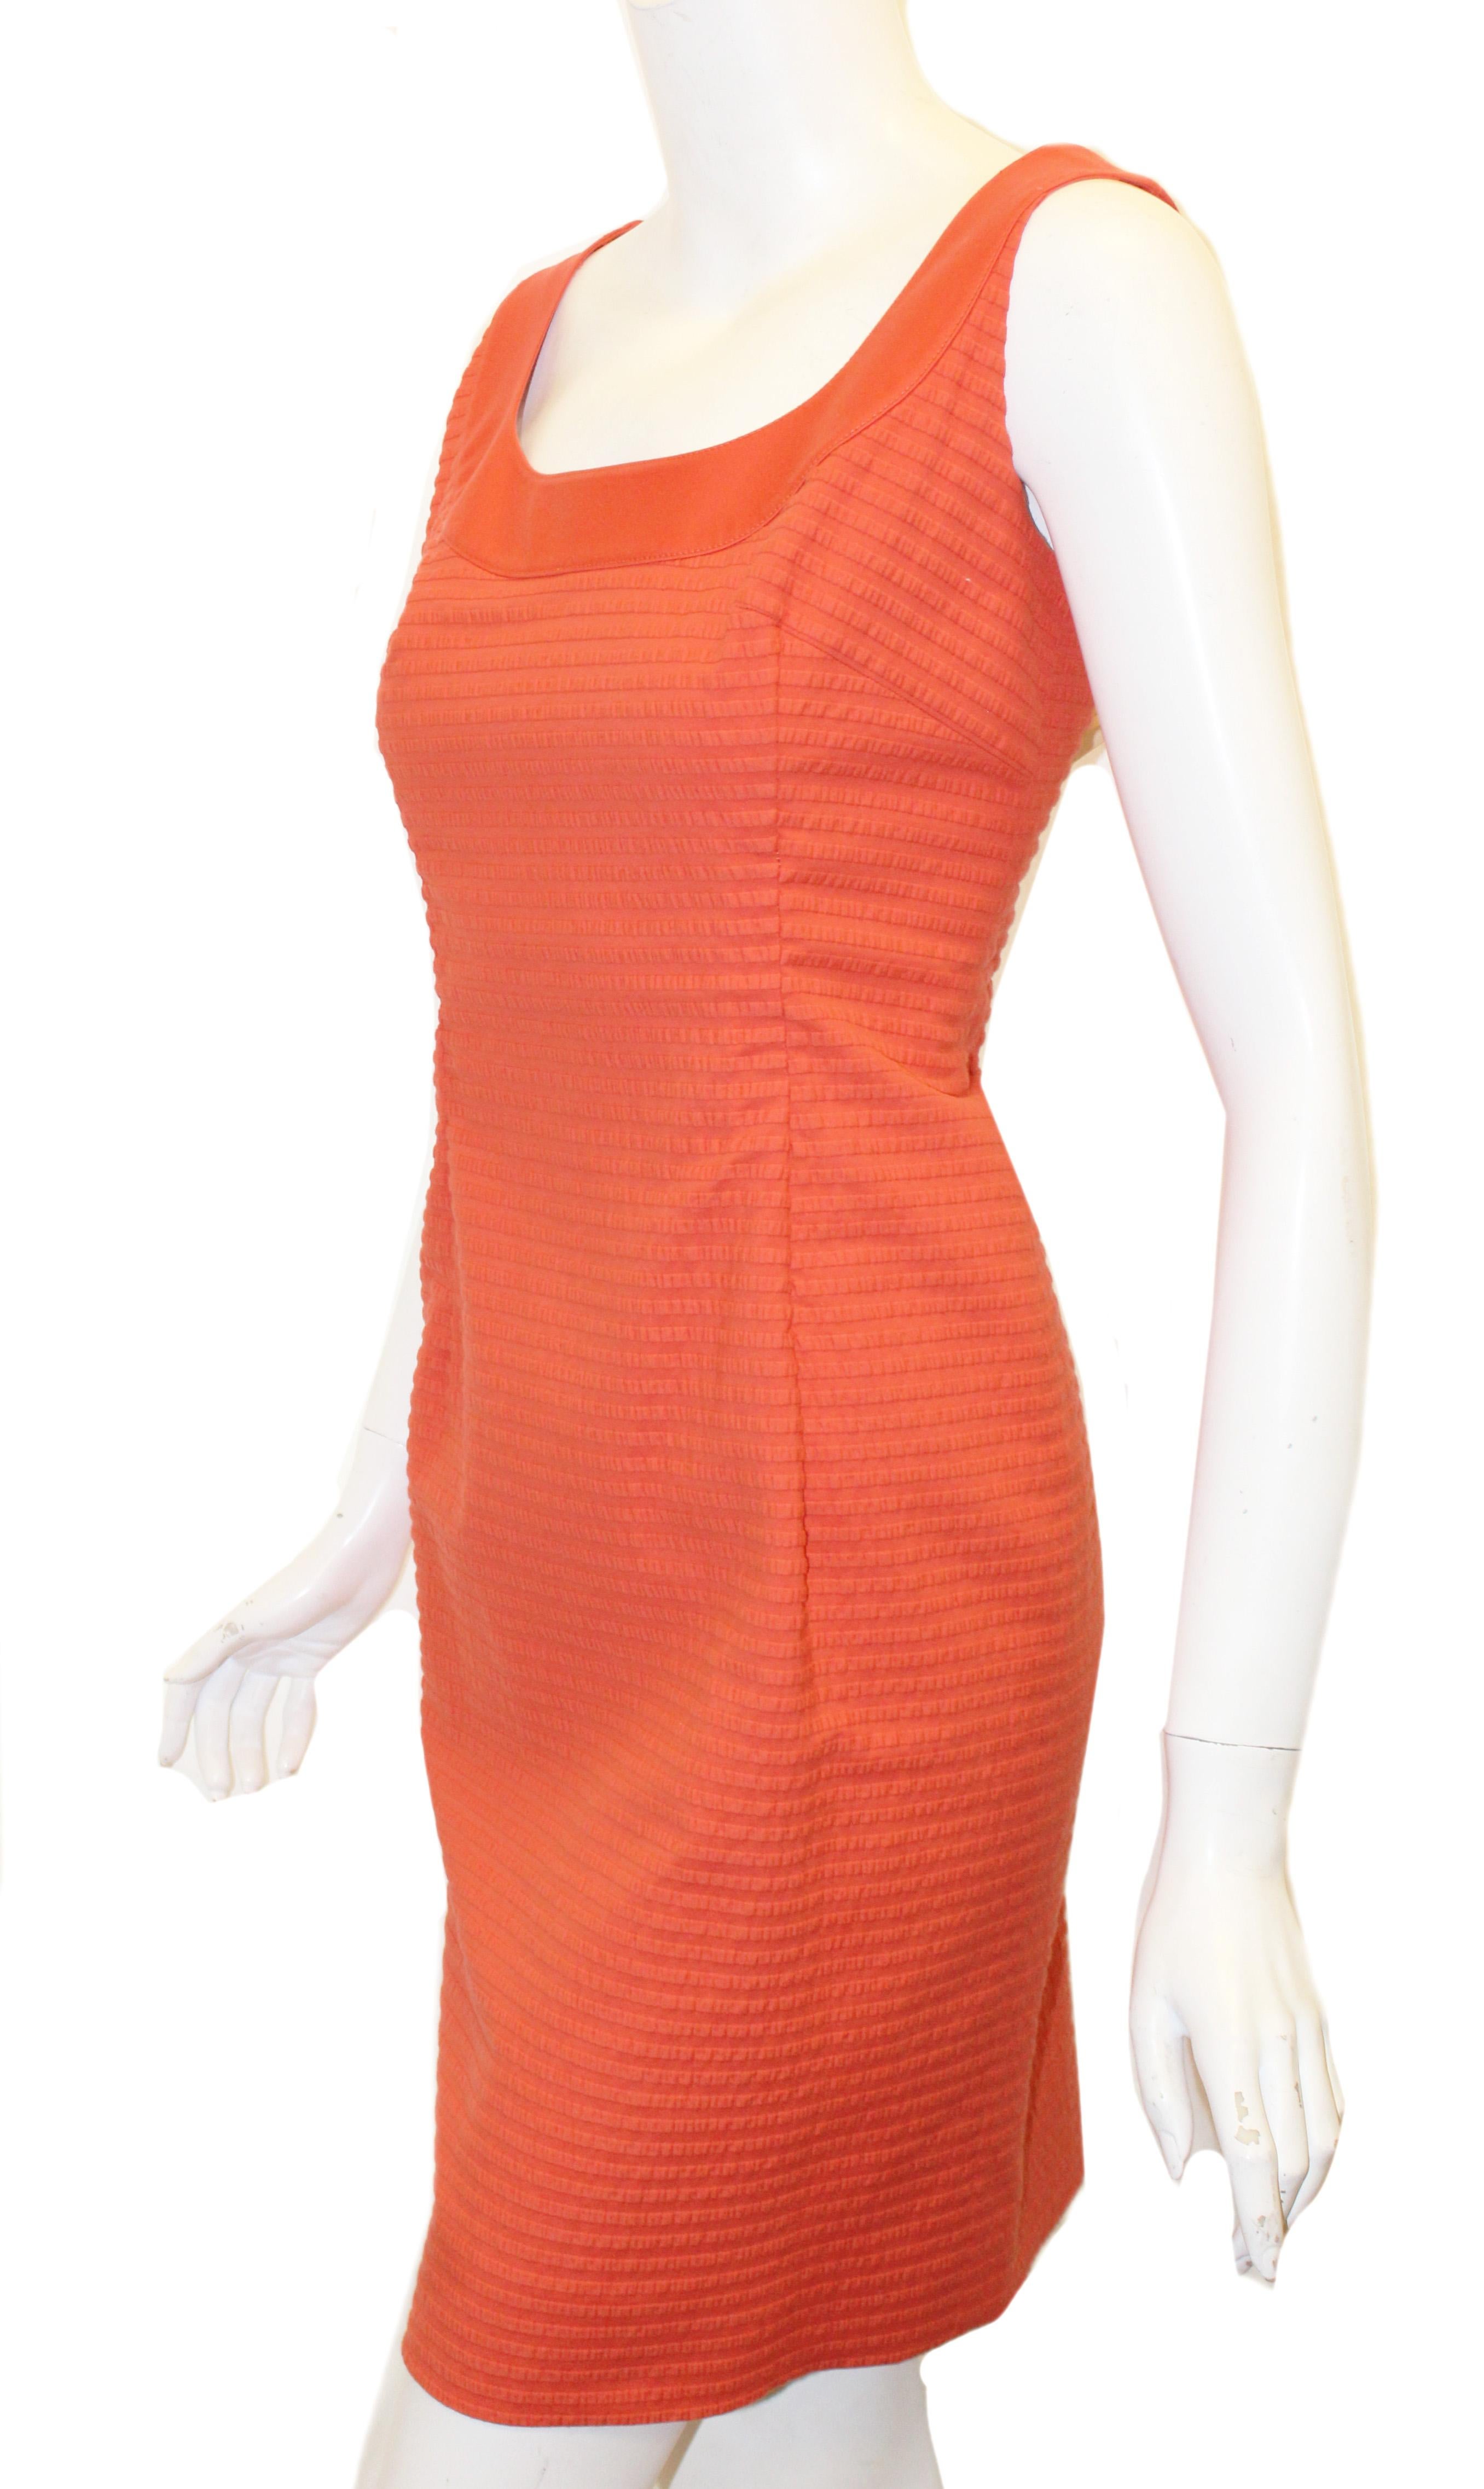 Akris Punto orange puckered fabric dress with round neckline is trimmed with same orange color fabric that is smooth.  This sheath dress contains a hidden zipper at back.  This dress is fully lined and is in excellent condition.  Made in Switzerland